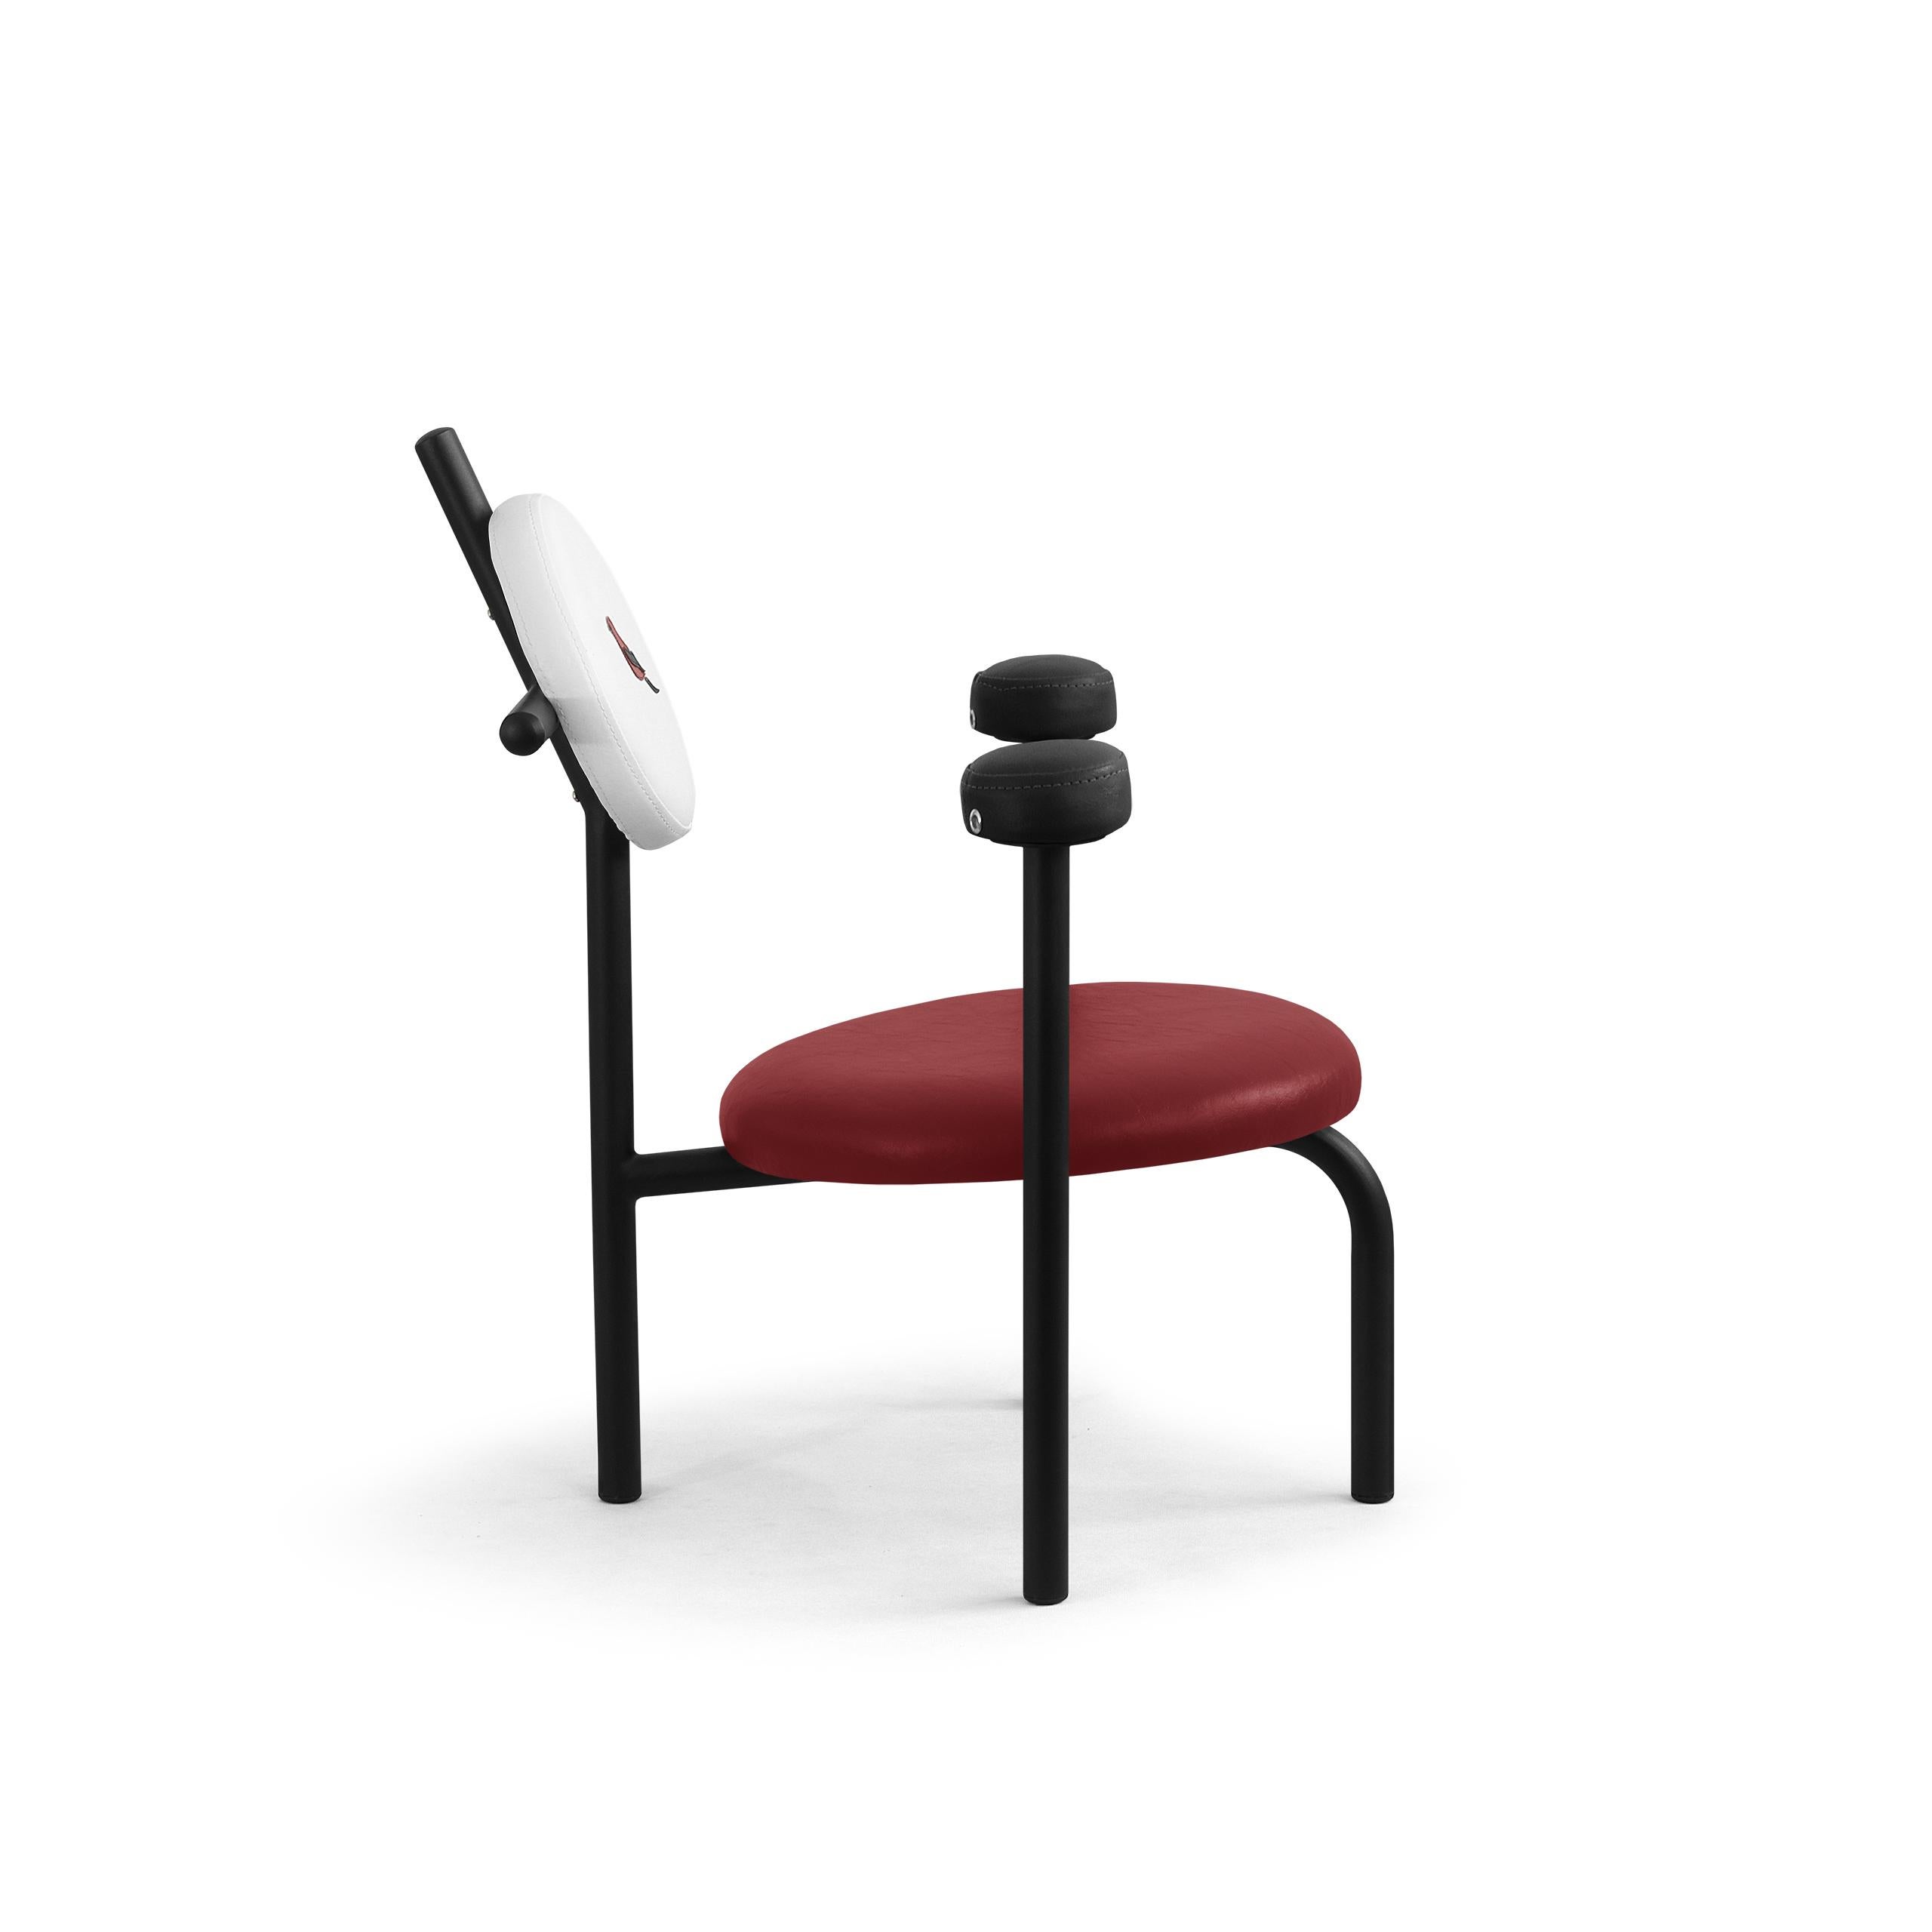 Appliqué PK18 Impermeable Armchair, Red Seat & Black Metal Structure by Paulo Kobylka For Sale